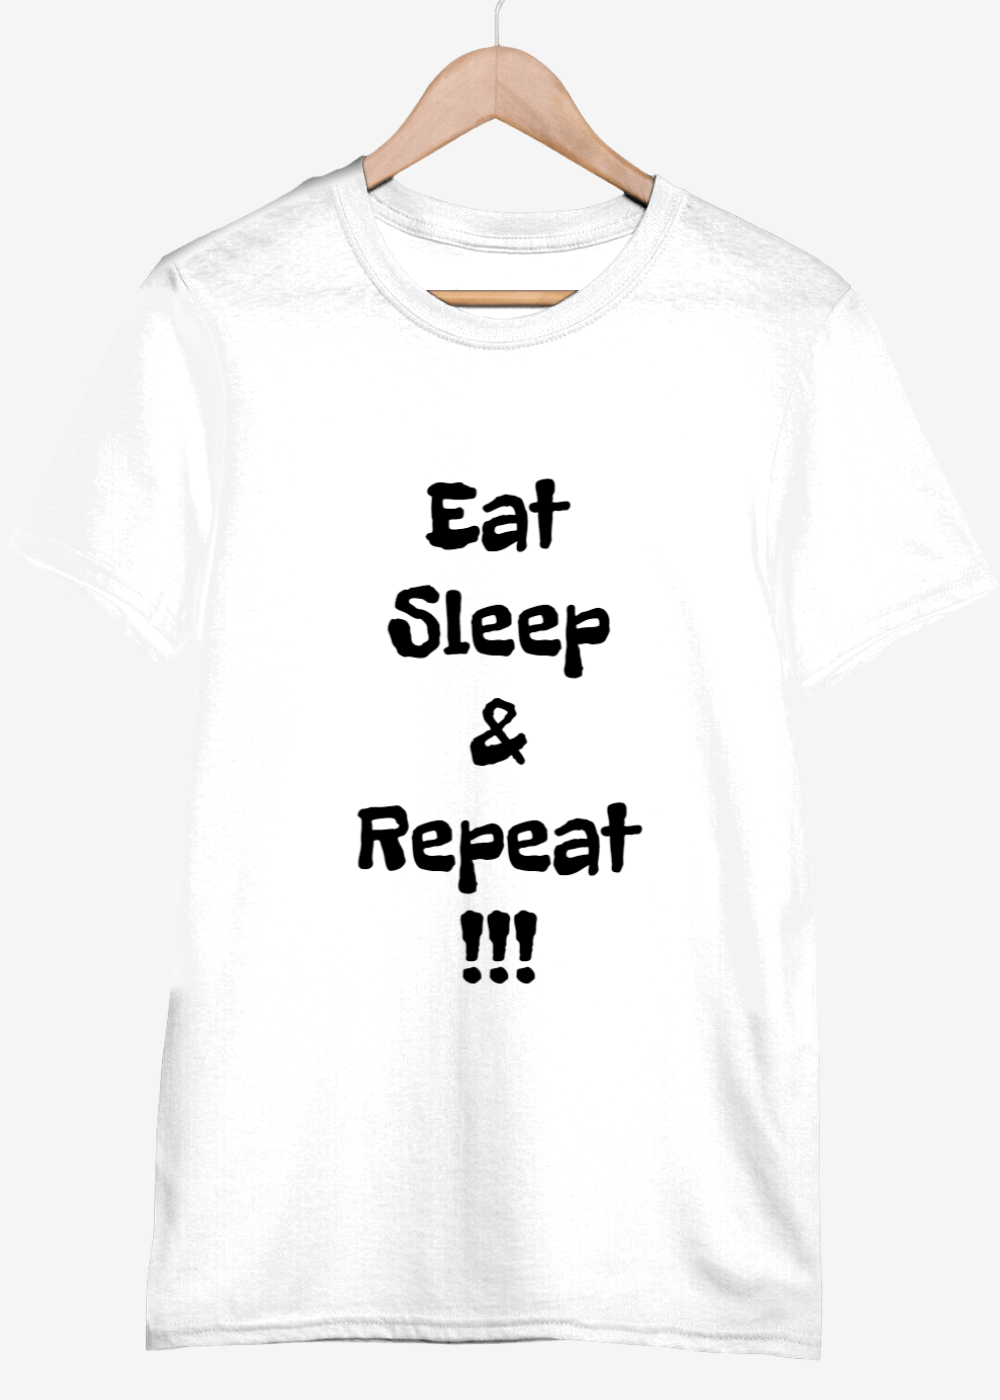 Mens Yellow Tshirts with Quotes - Eat Sleep Repeat